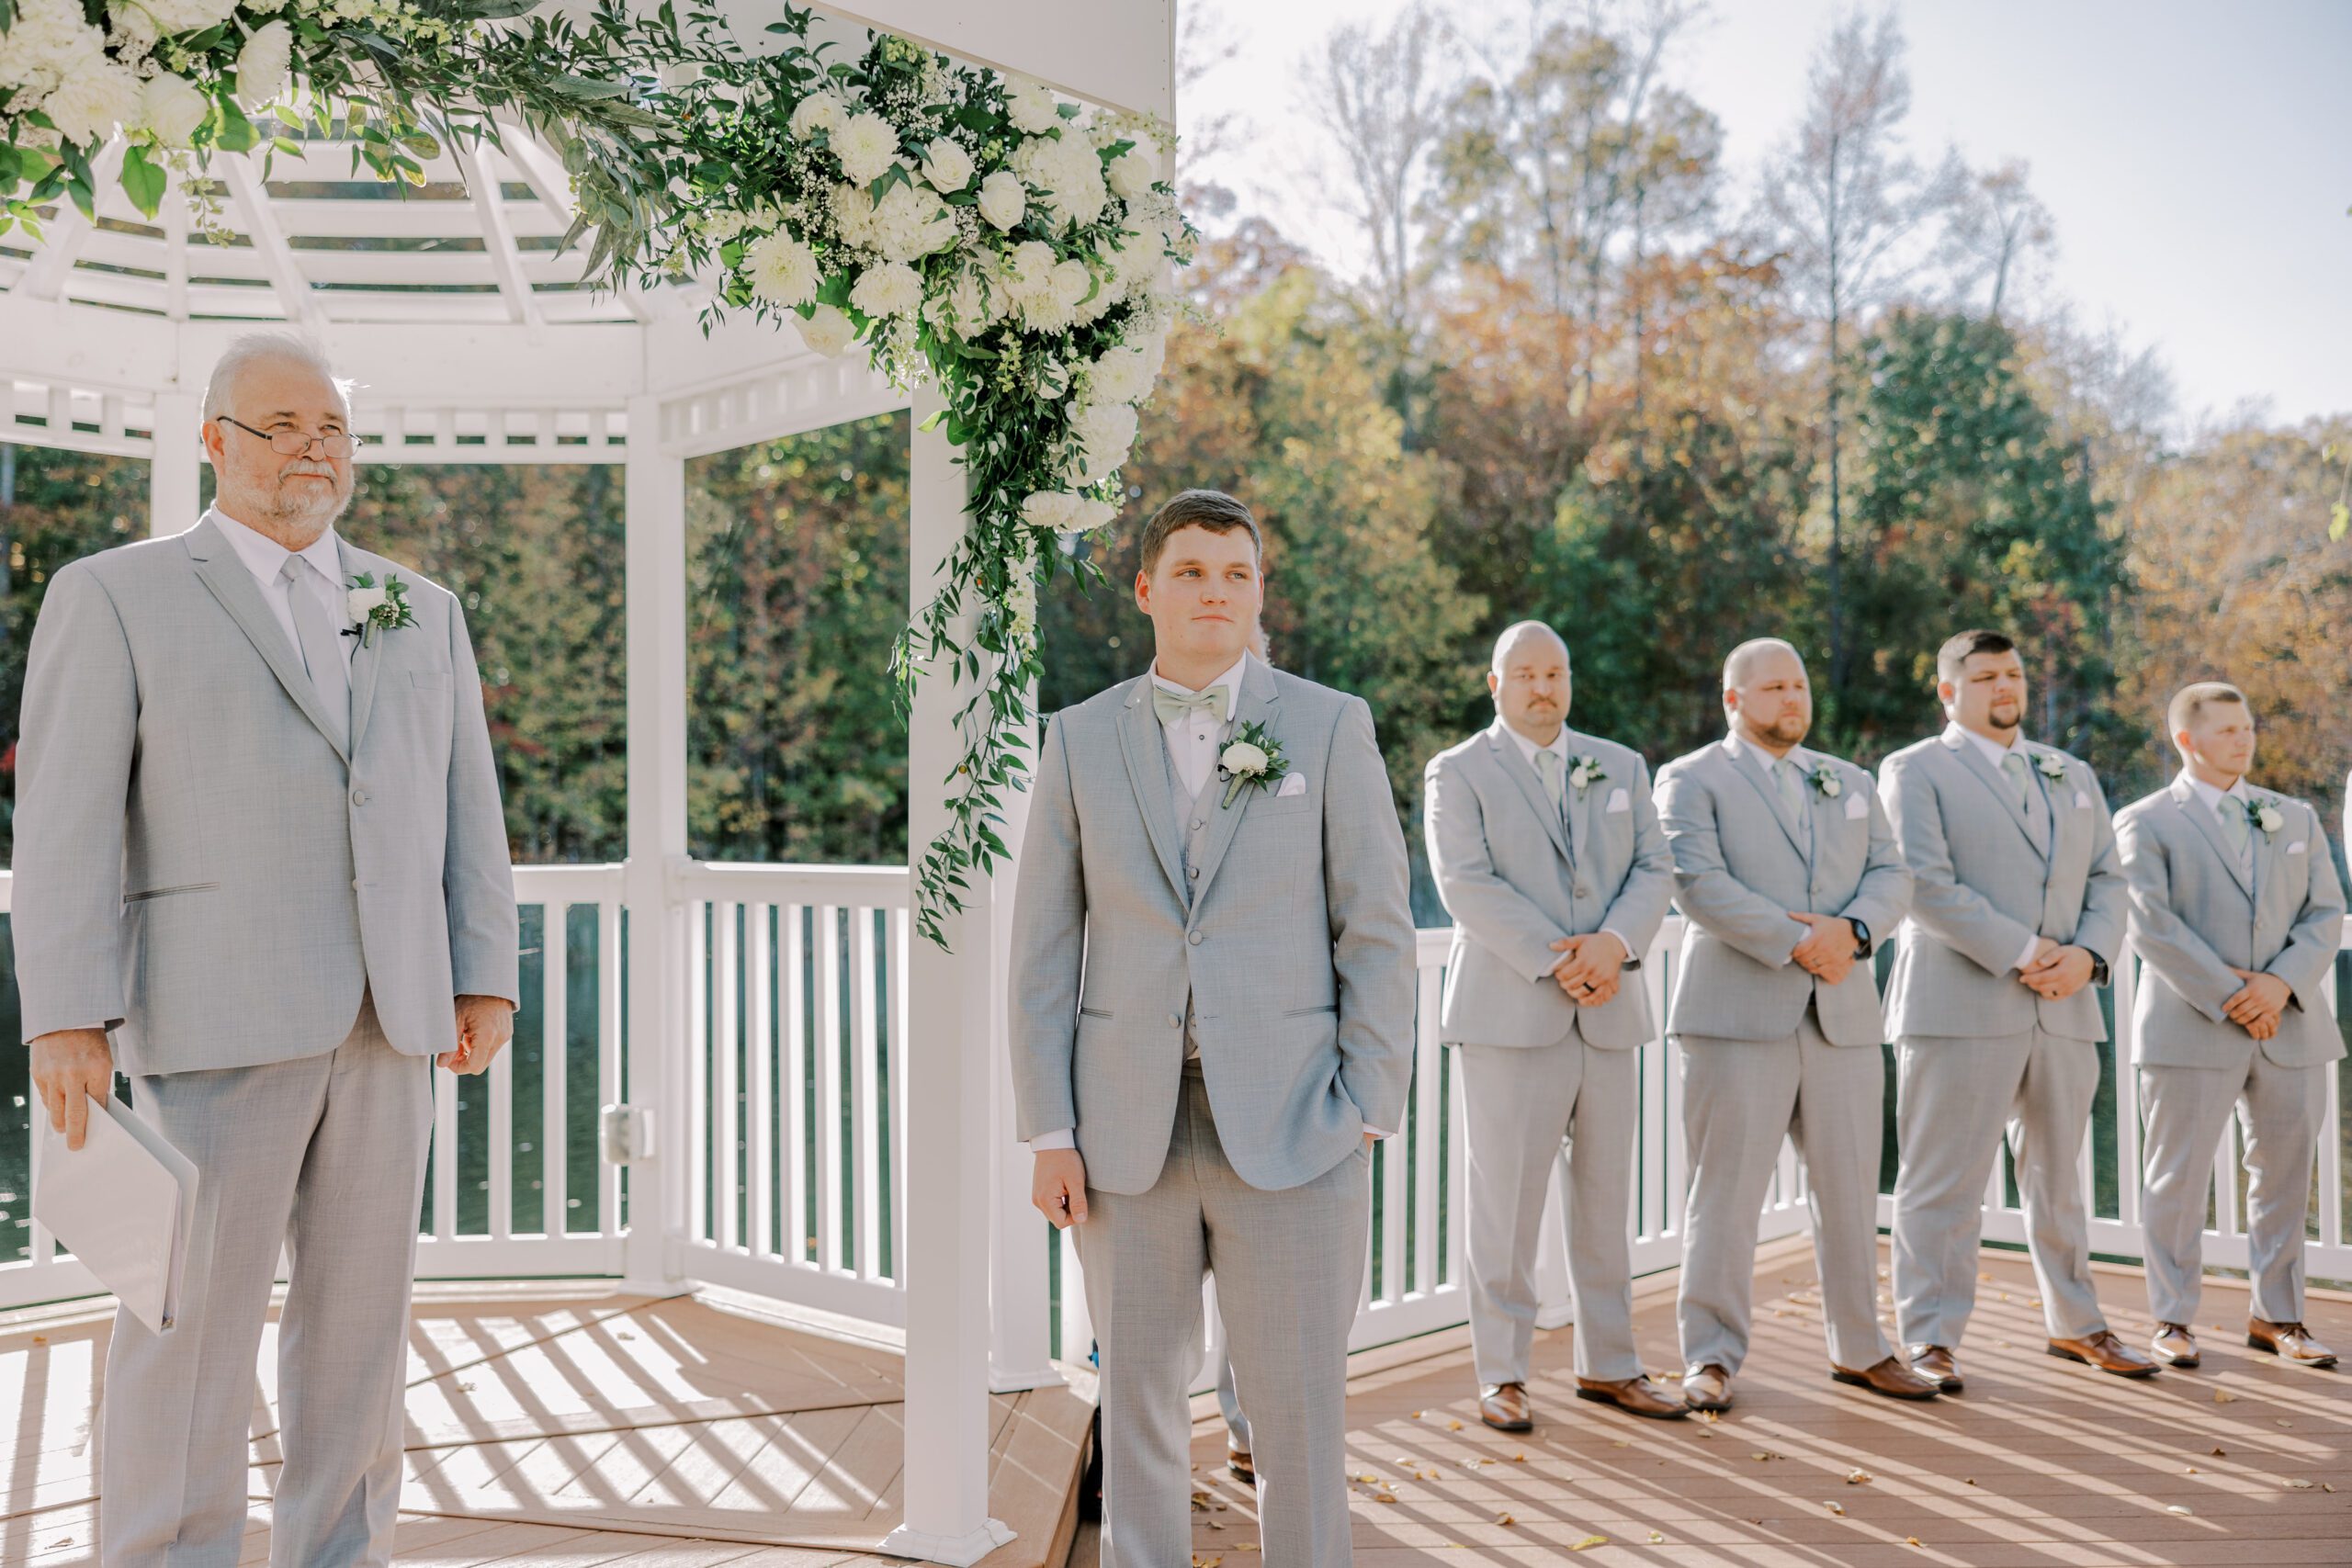 Groom standing next to the gazebo, officiant and groomsmen on either side of him, there are white florals hanging from gazebo at the arbor haven fall wedding